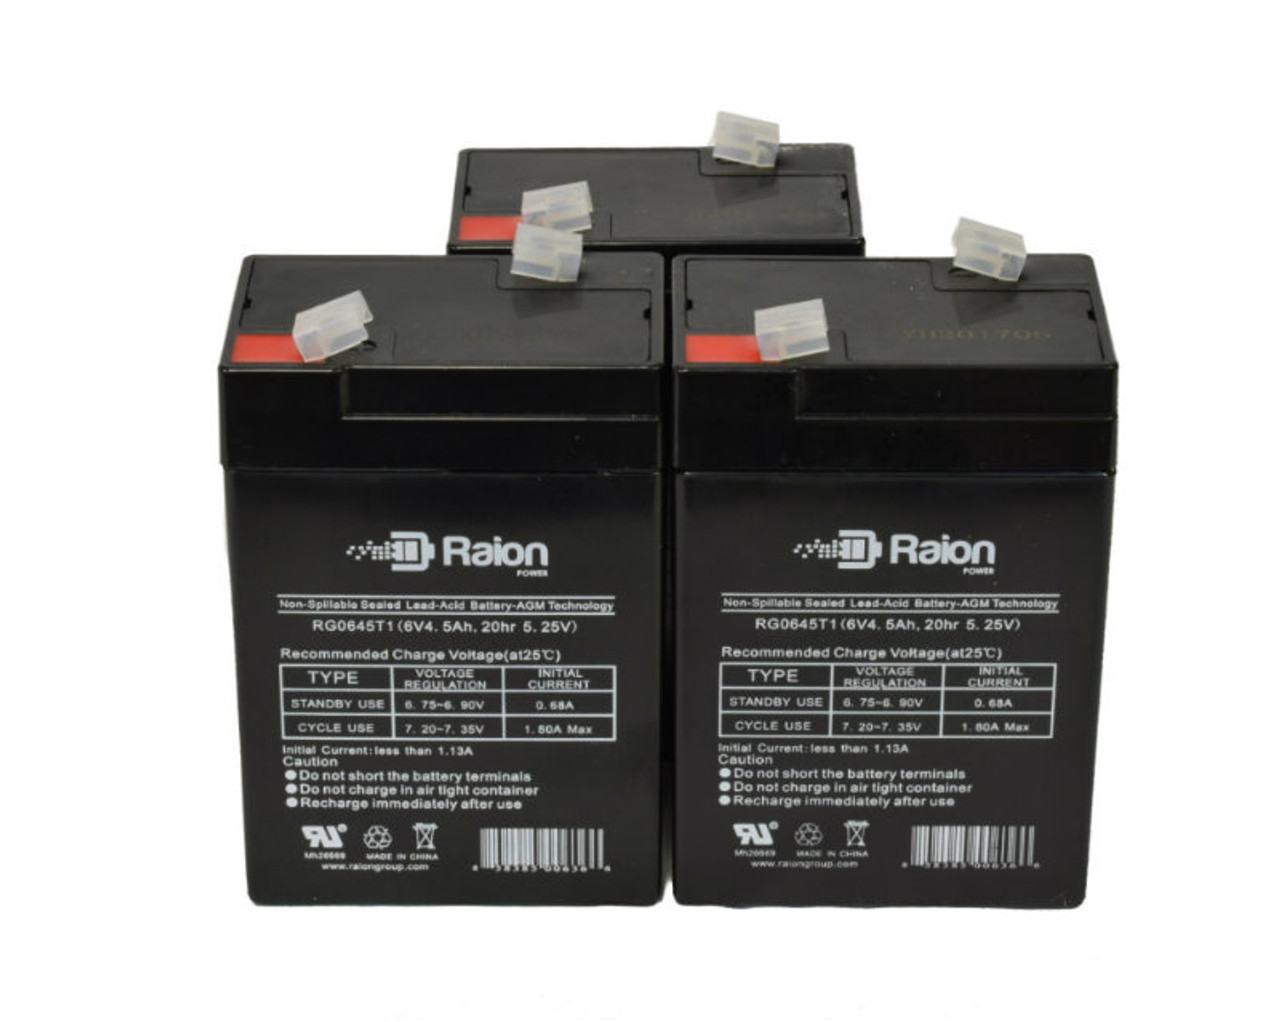 Raion Power 6V 4.5Ah Replacement Emergency Light Battery for Chloride 100R010145 - 3 Pack